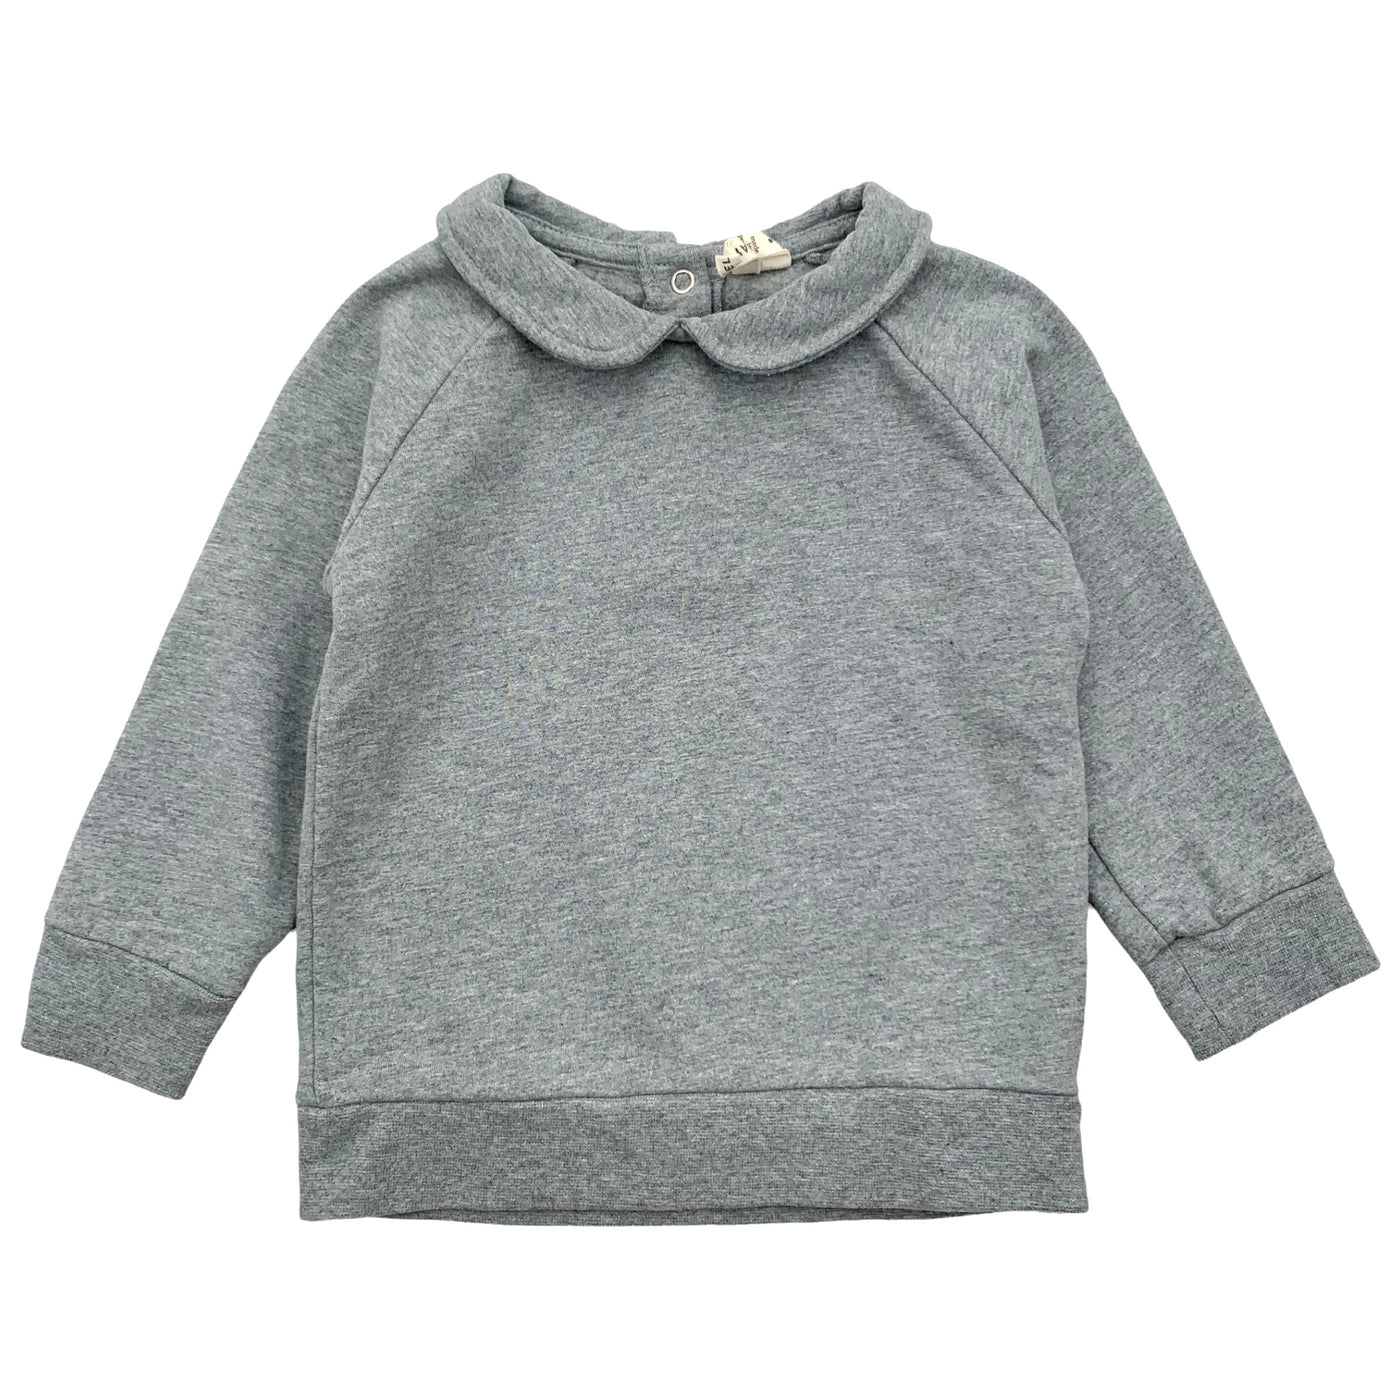 Graylabel sweater with collar mixed grey 12-18 months